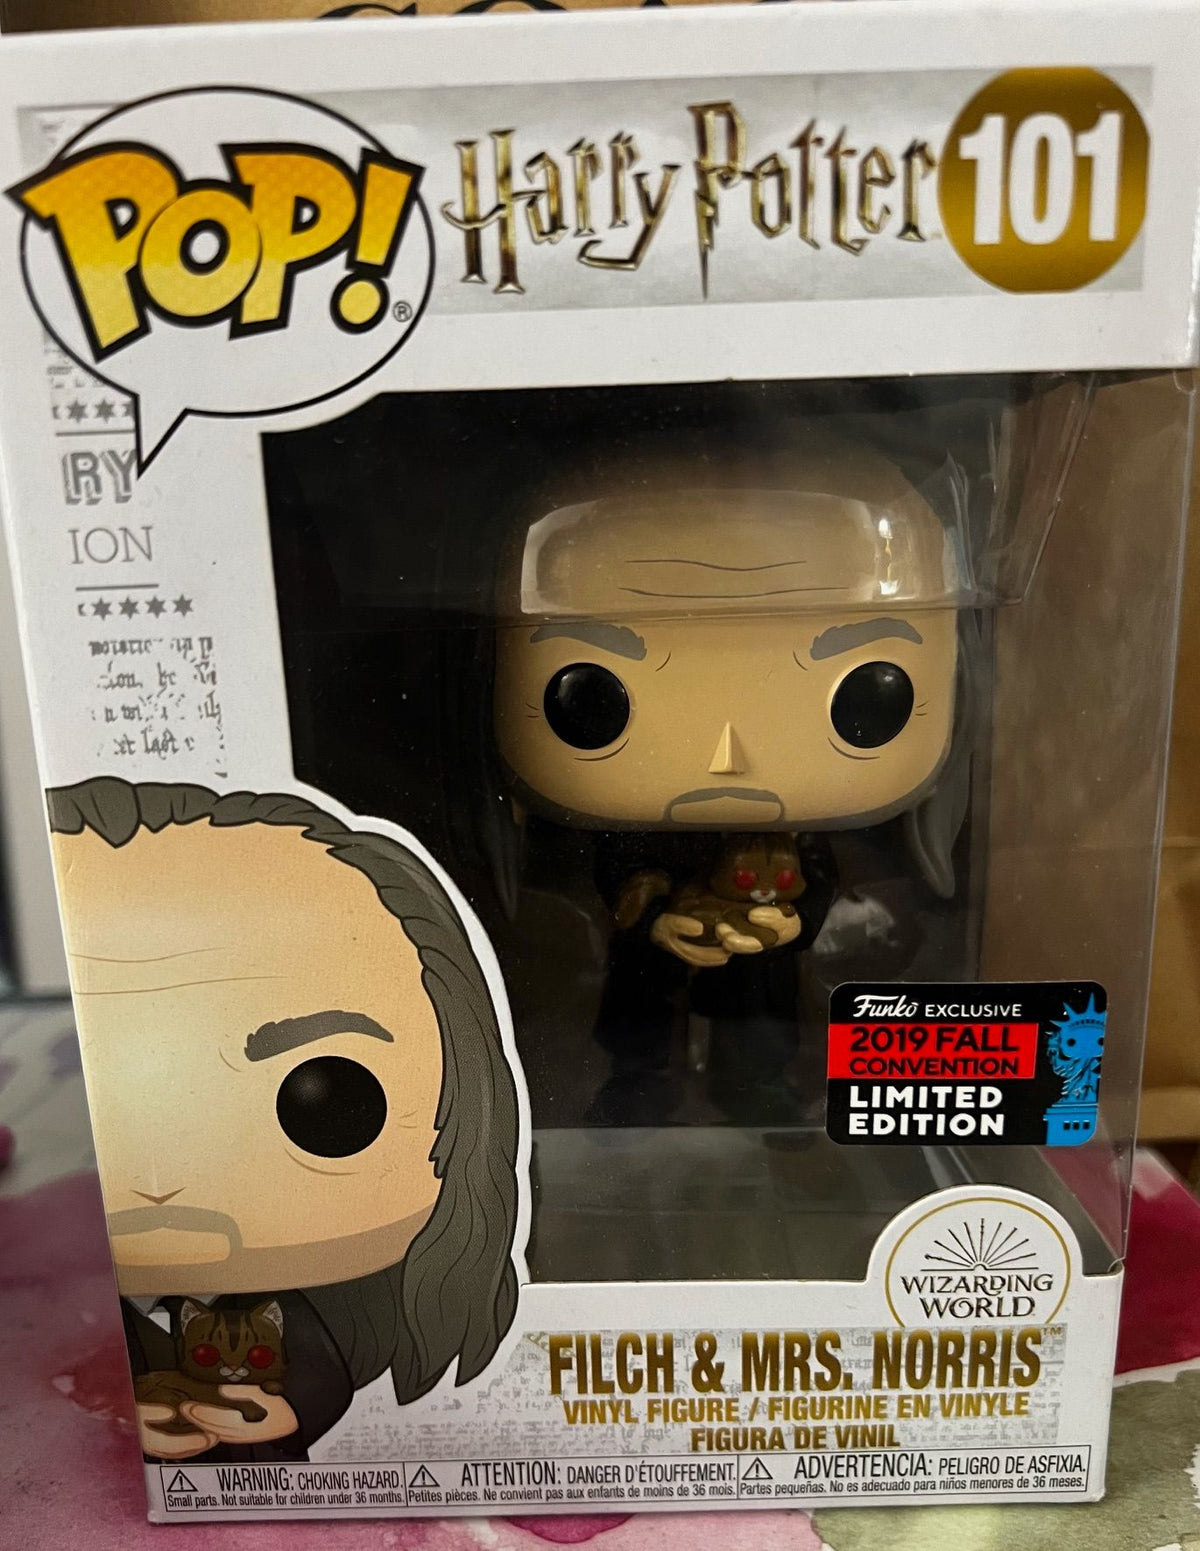 #101 - Filch &amp; Mrs. Norris (2019 Fall Convention Limited Edition) - Harry Potter - 1